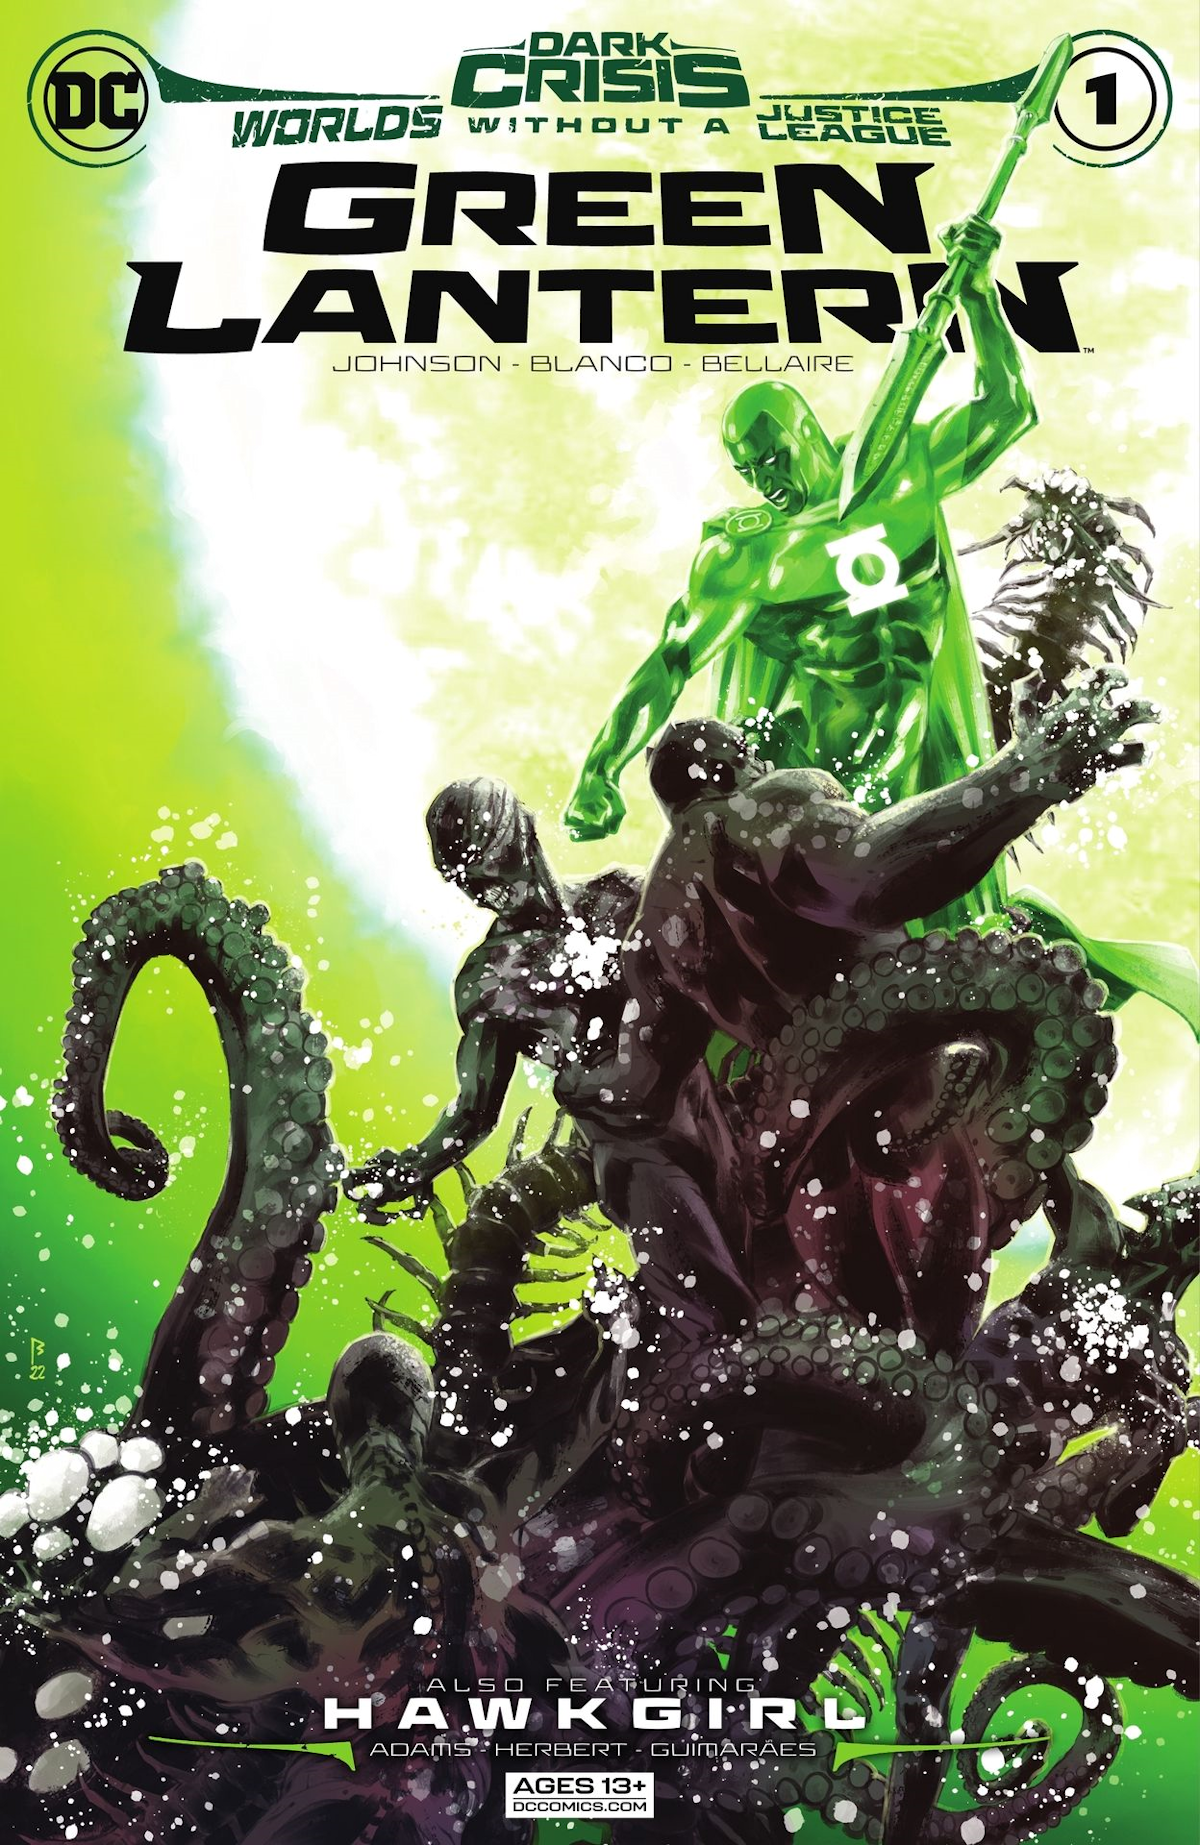 Dark Crisis: Worlds Without a Justice League - Green Lantern 1